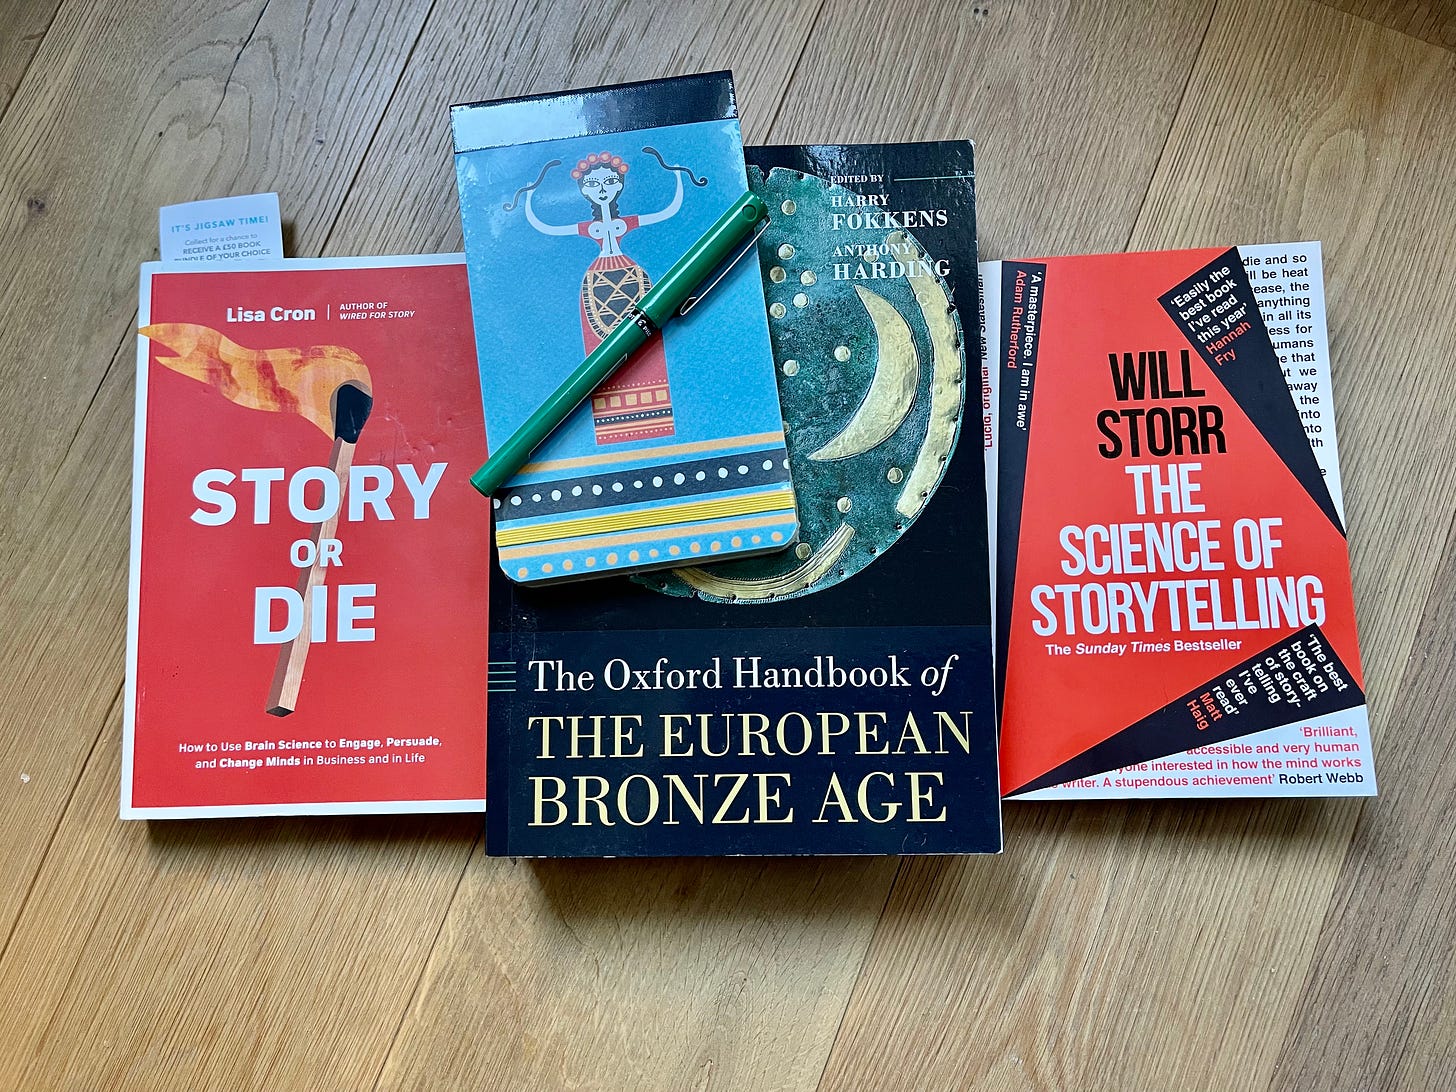 A hardwood floor with three books: Story or Die, The Oxford handbook of the European Bronze Age and The Science of Storytelling. On top of the books is a little notebook and a green pen